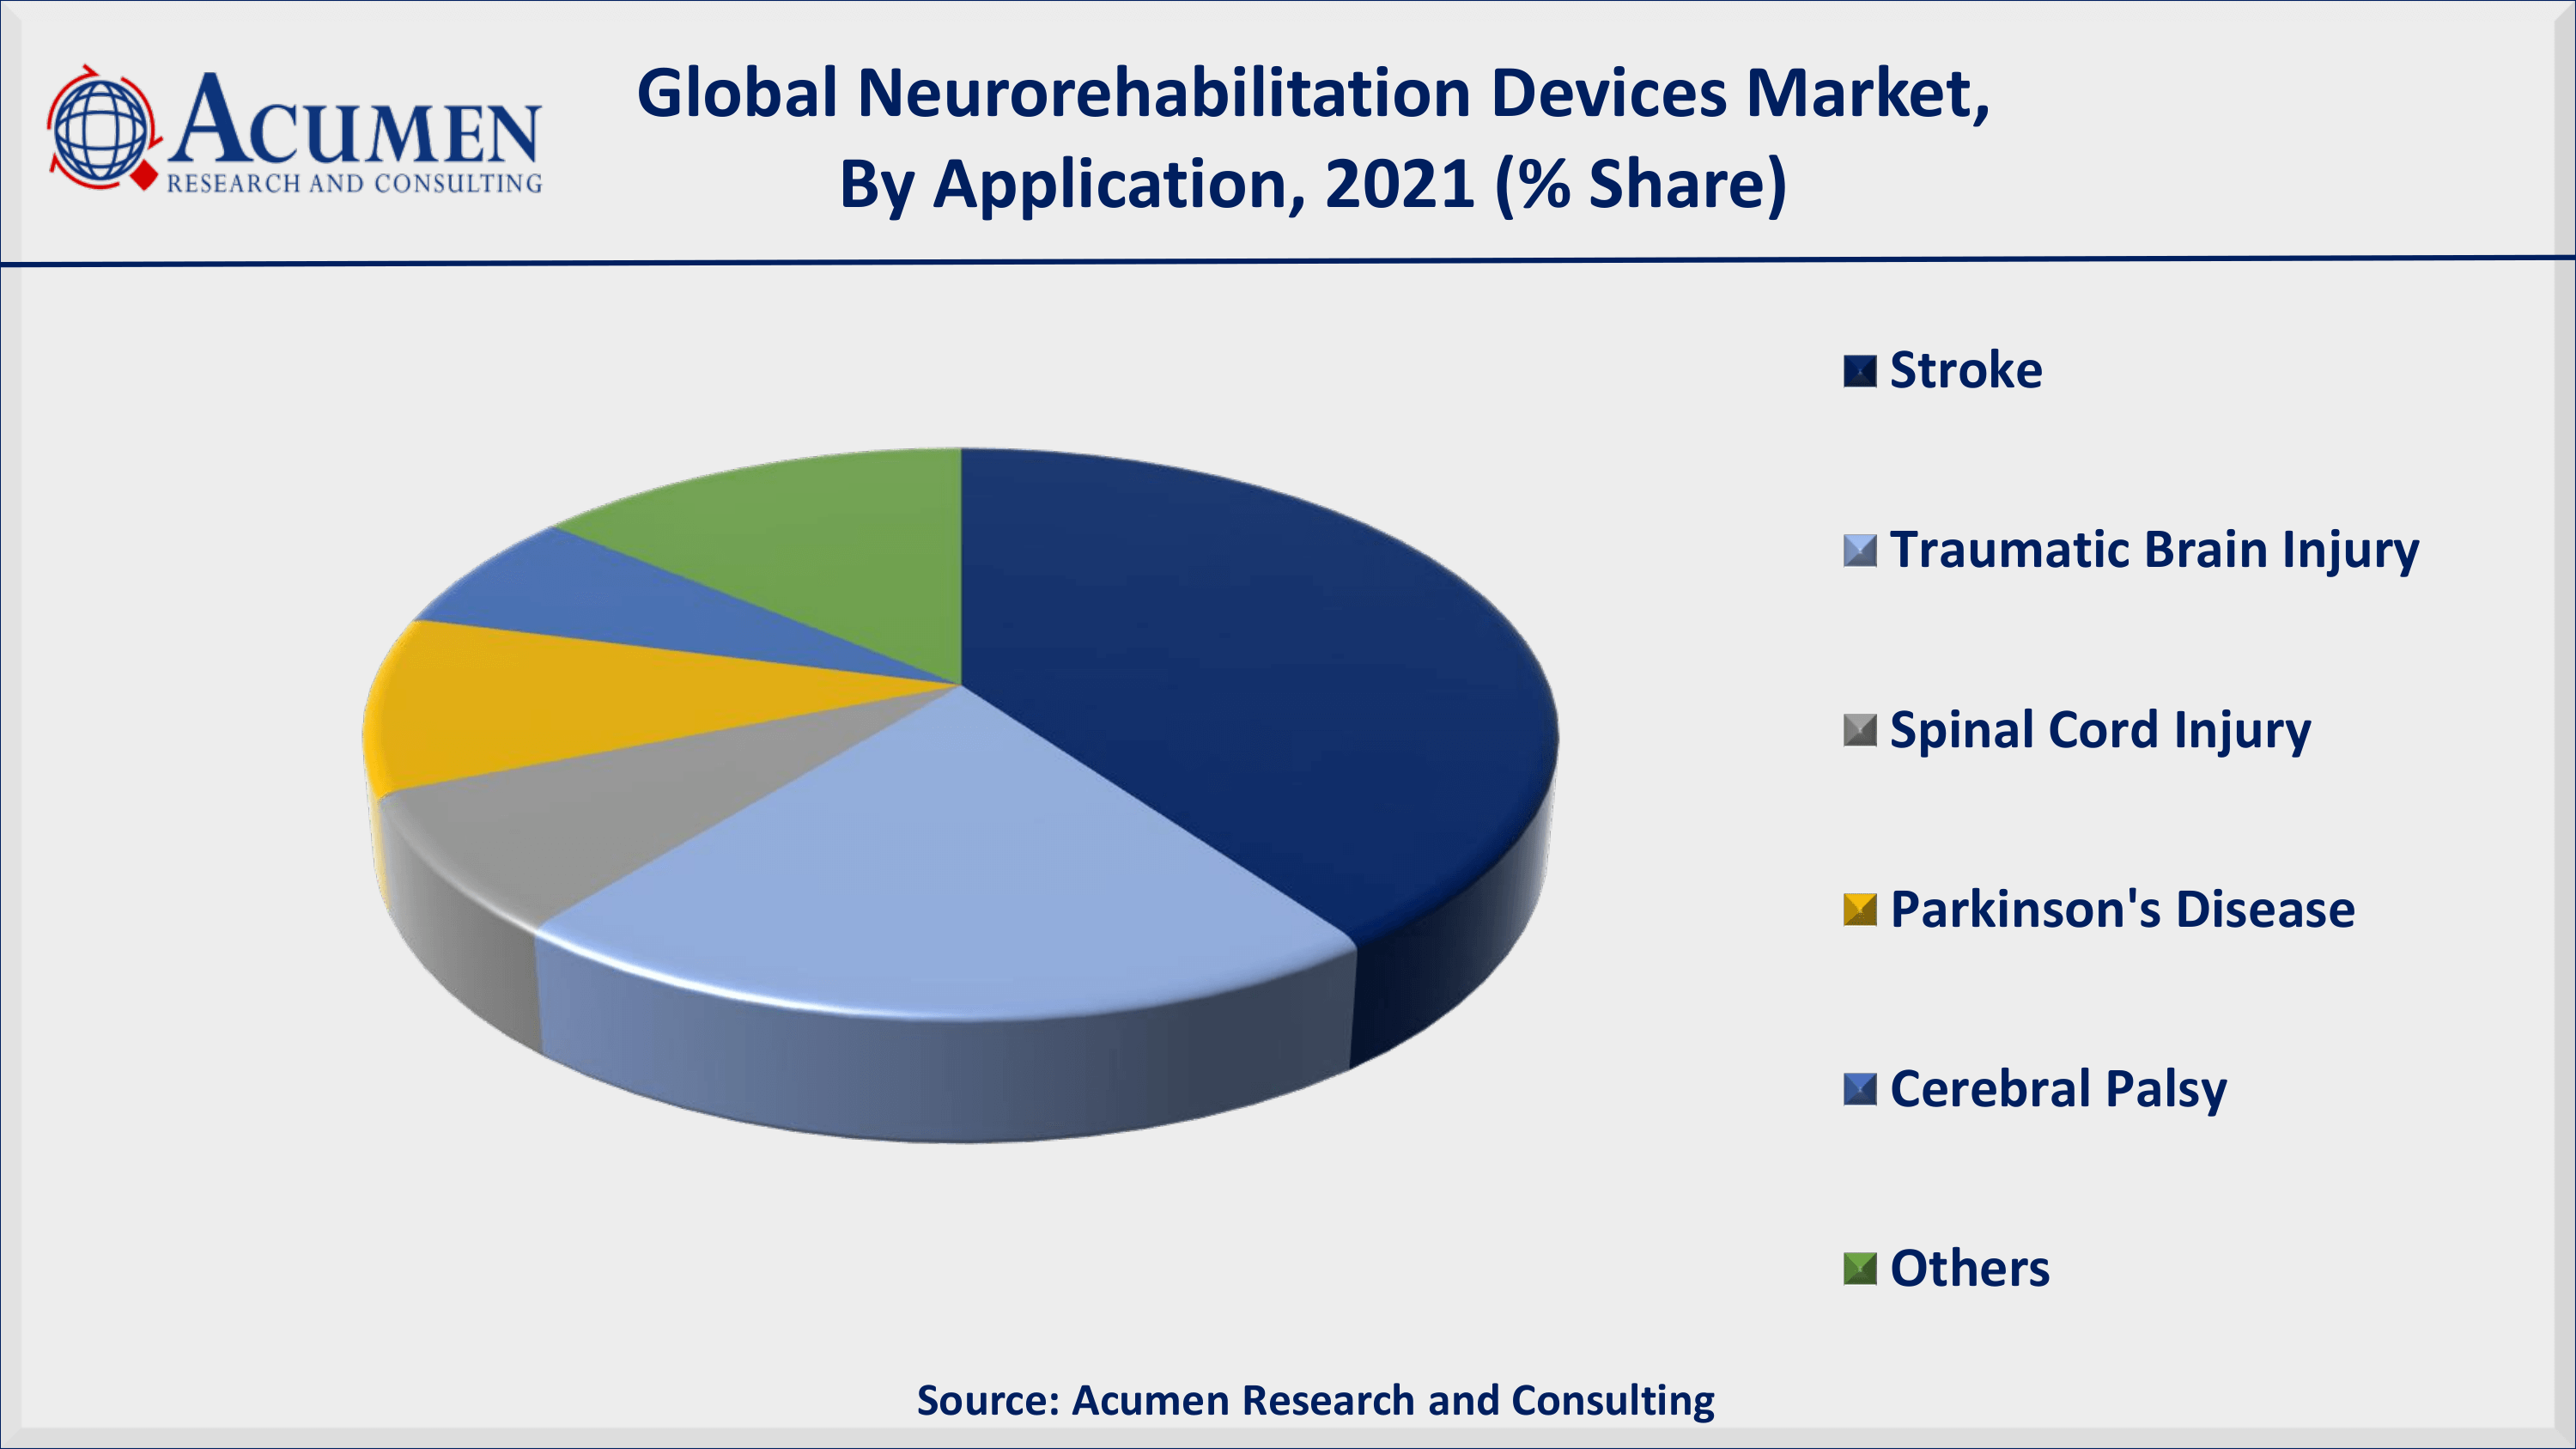 Based on application segment, stroke attained more than 40% of the total market share in 2021